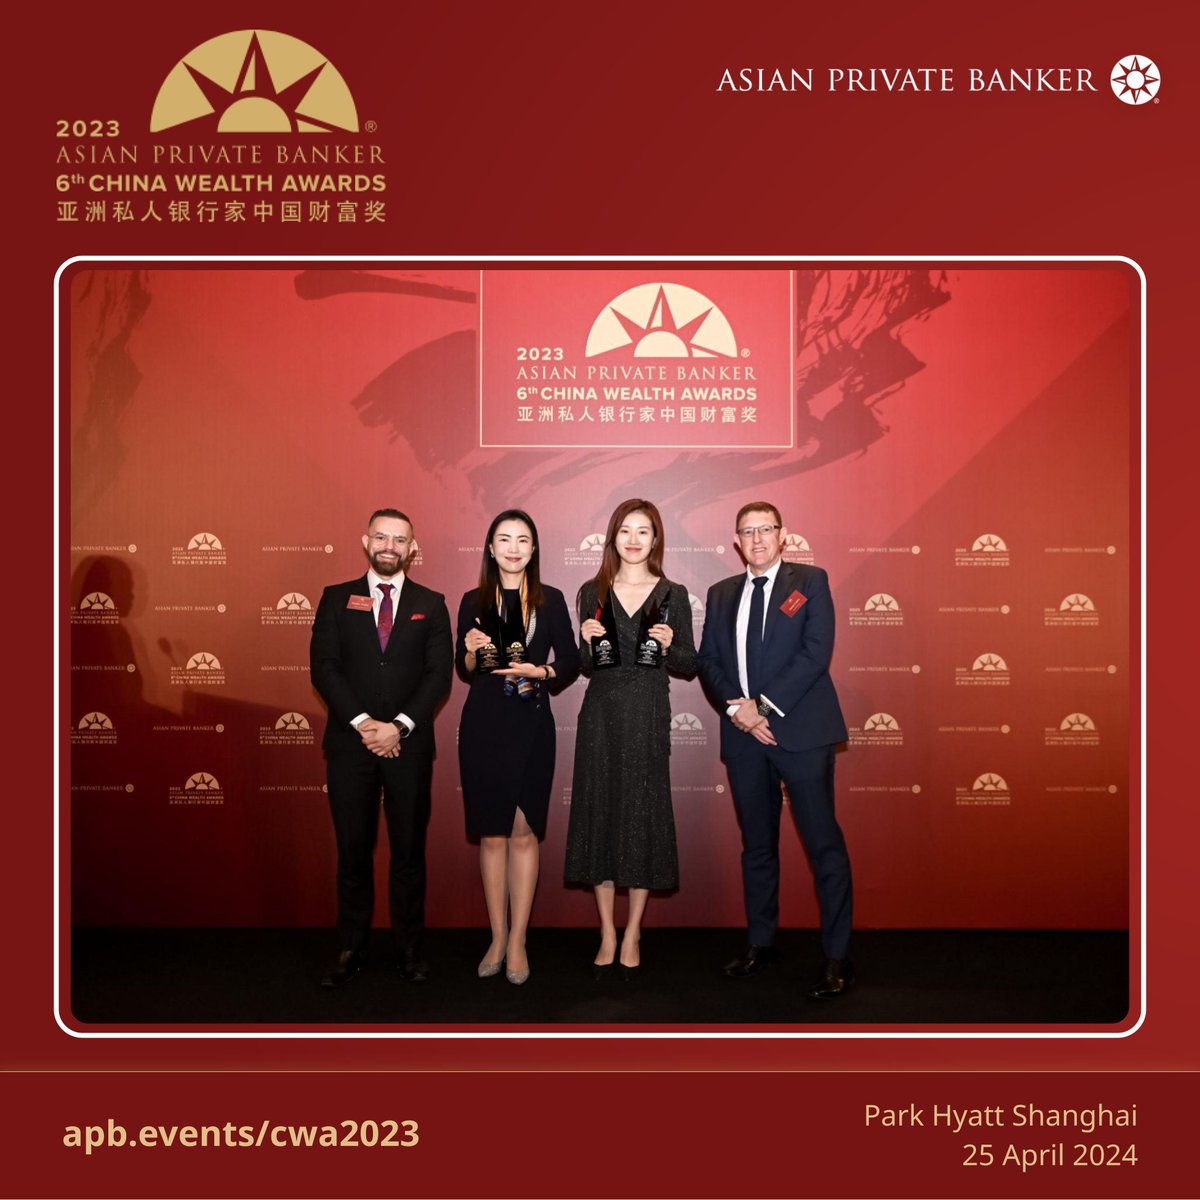 Accepting Best Private Bank – Next Generation (Gold), Investment & Research (Gold), Alternative Investments (Gold), International Services (Silver), Asset Allocation (Silver), Digital Innovation (Silver) and Philanthropy (Bronze) is Private Banking of China CITIC Bank #APBCWA2023